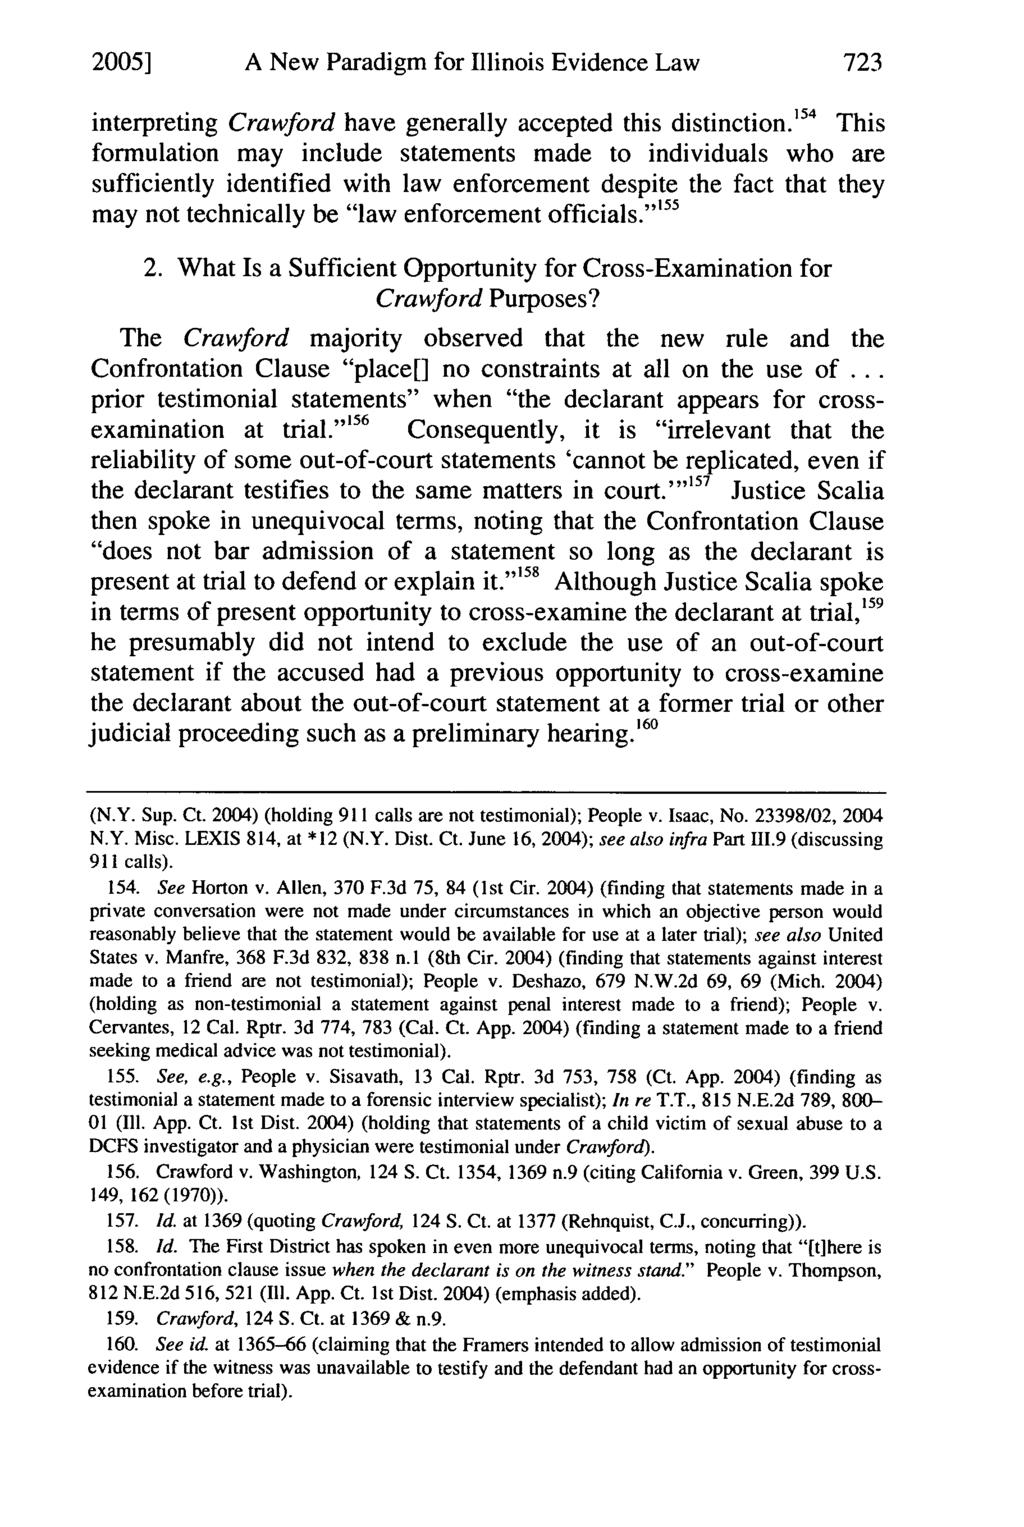 2005] A New Paradigm for Illinois Evidence Law interpreting Crawford have generally accepted this distinction.